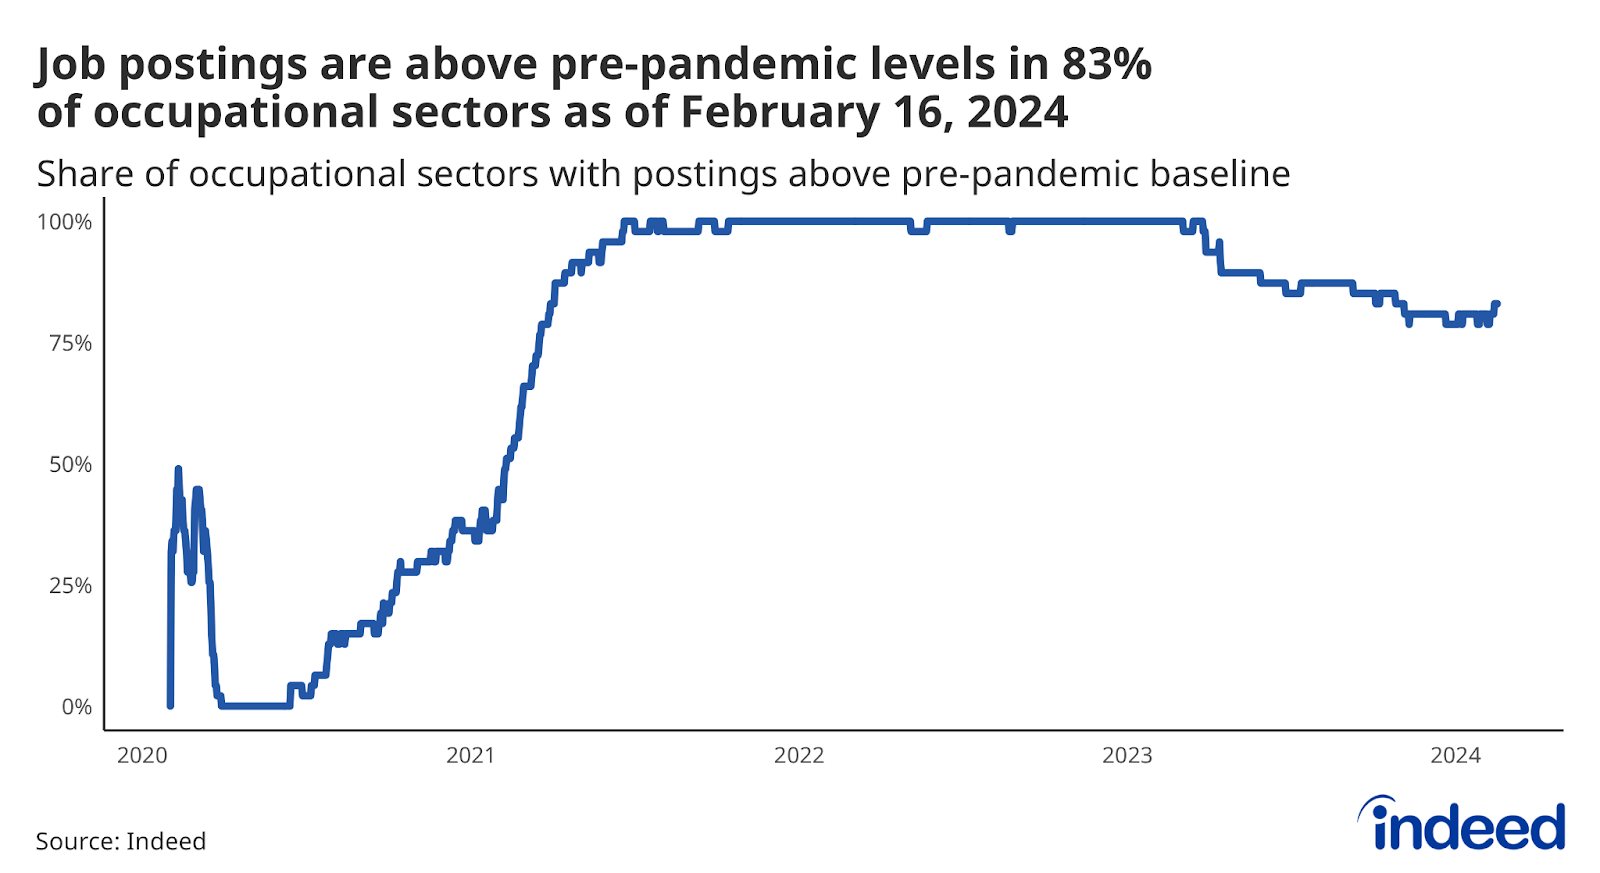  Line chart titled “Job postings are above pre-pandemic levels in 83% of occupational sectors as of Feb. 16, 2024.” With a vertical axis ranging from 0 to 100, and a horizontal axis ranging from February 2020 to February 2024, Indeed tracked the share of occupational sectors whose postings are above their pre-pandemic baseline.